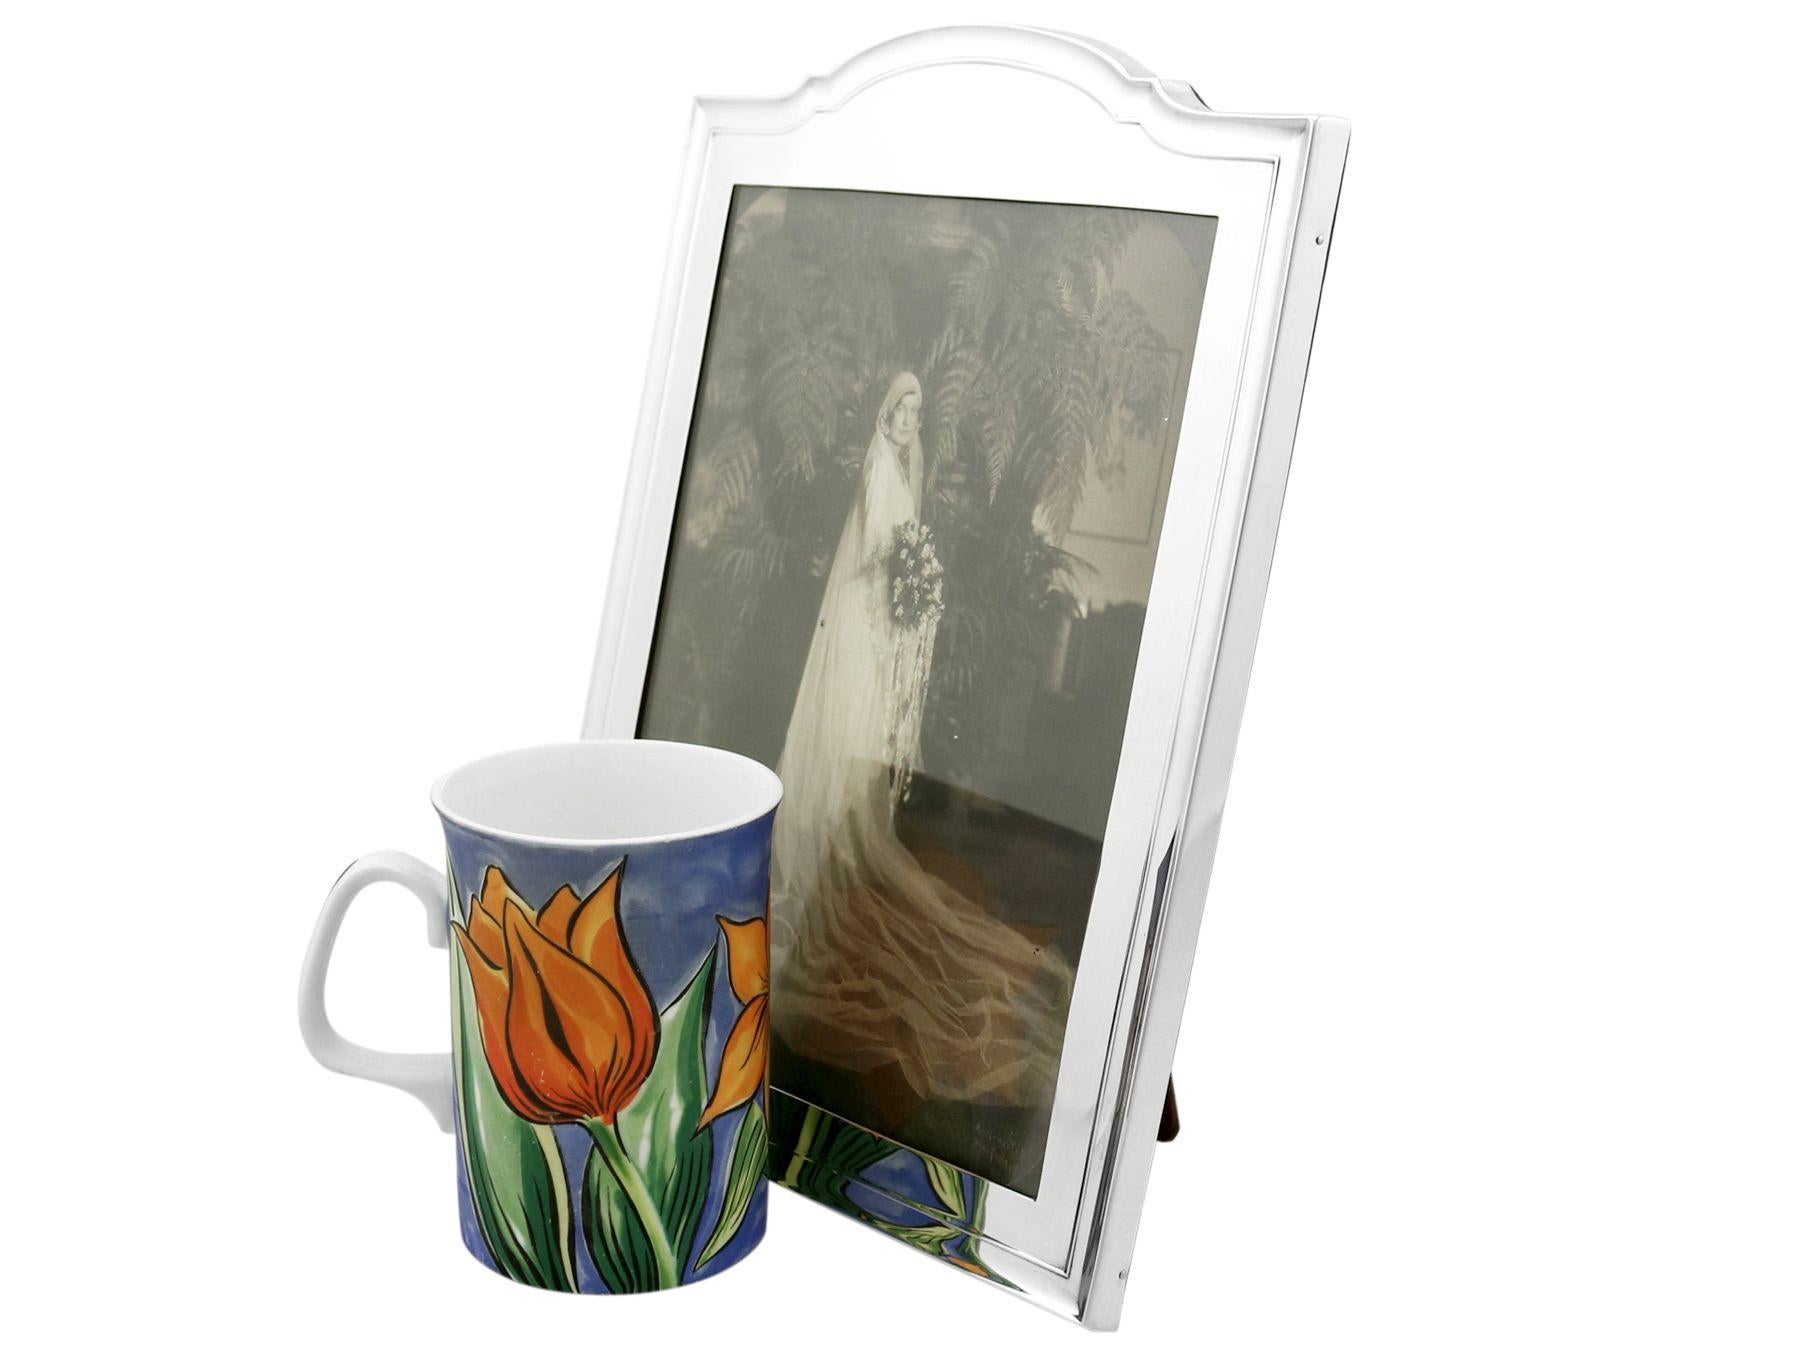 An exceptional, fine and impressive antique English sterling silver photograph frame; an addition to our ornamental silverware collection.

This exceptional antique sterling silver photograph frame has a rounded rectangular form with an incurved,